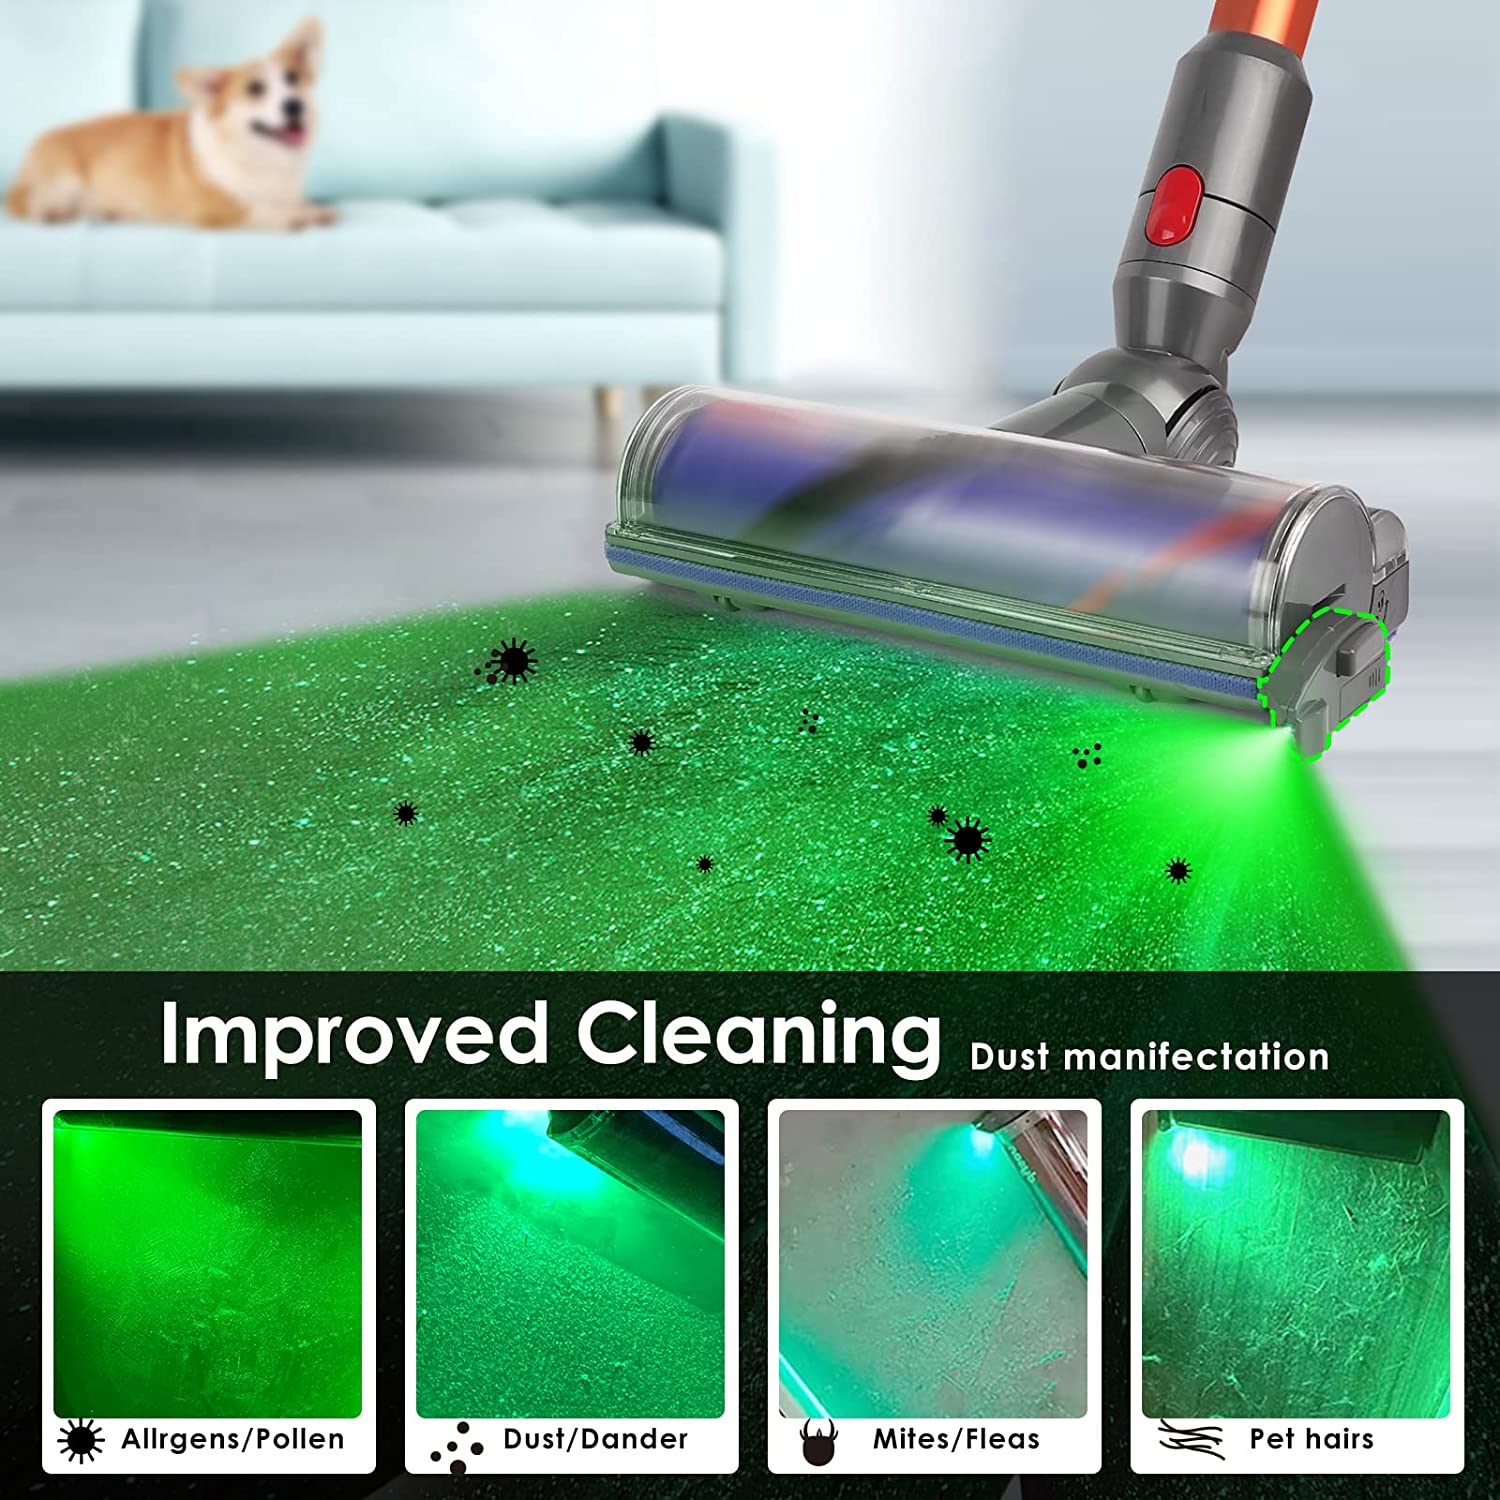 DS BS Vacuum Cleaner Dust Display LED Lamp